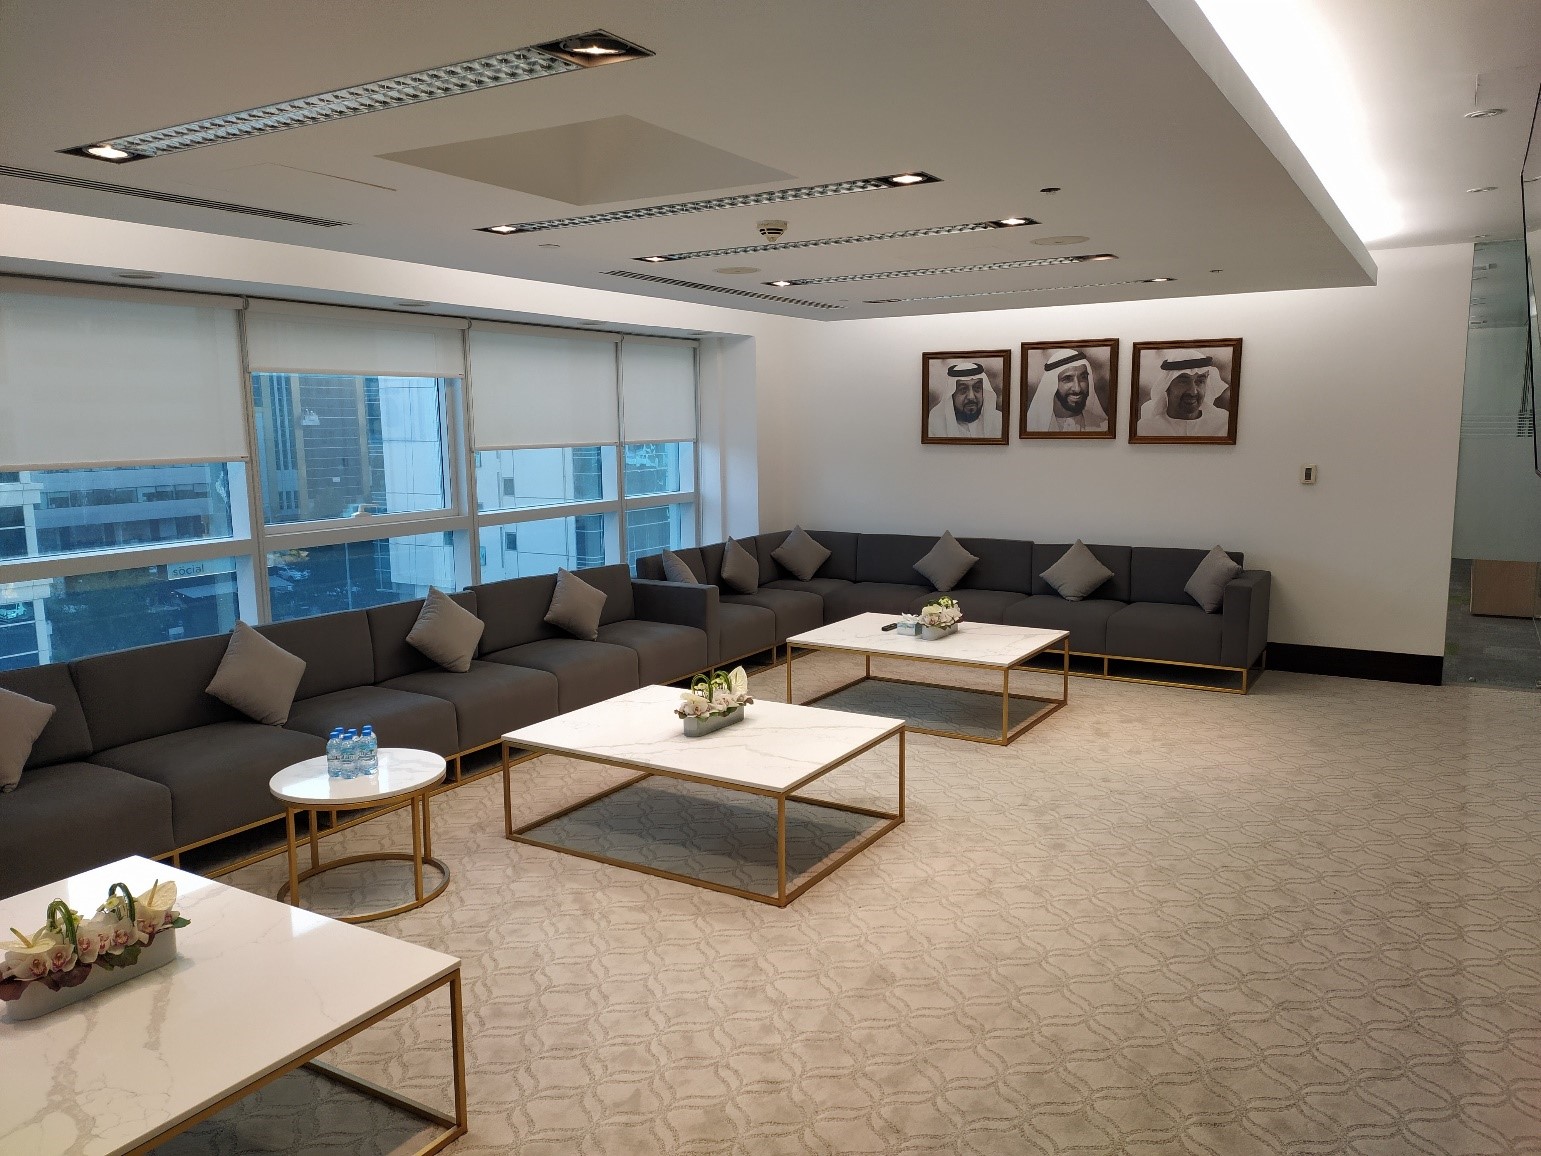 Best Office Furniture Selection in Dubai: Opting for In-person Furniture Shopping